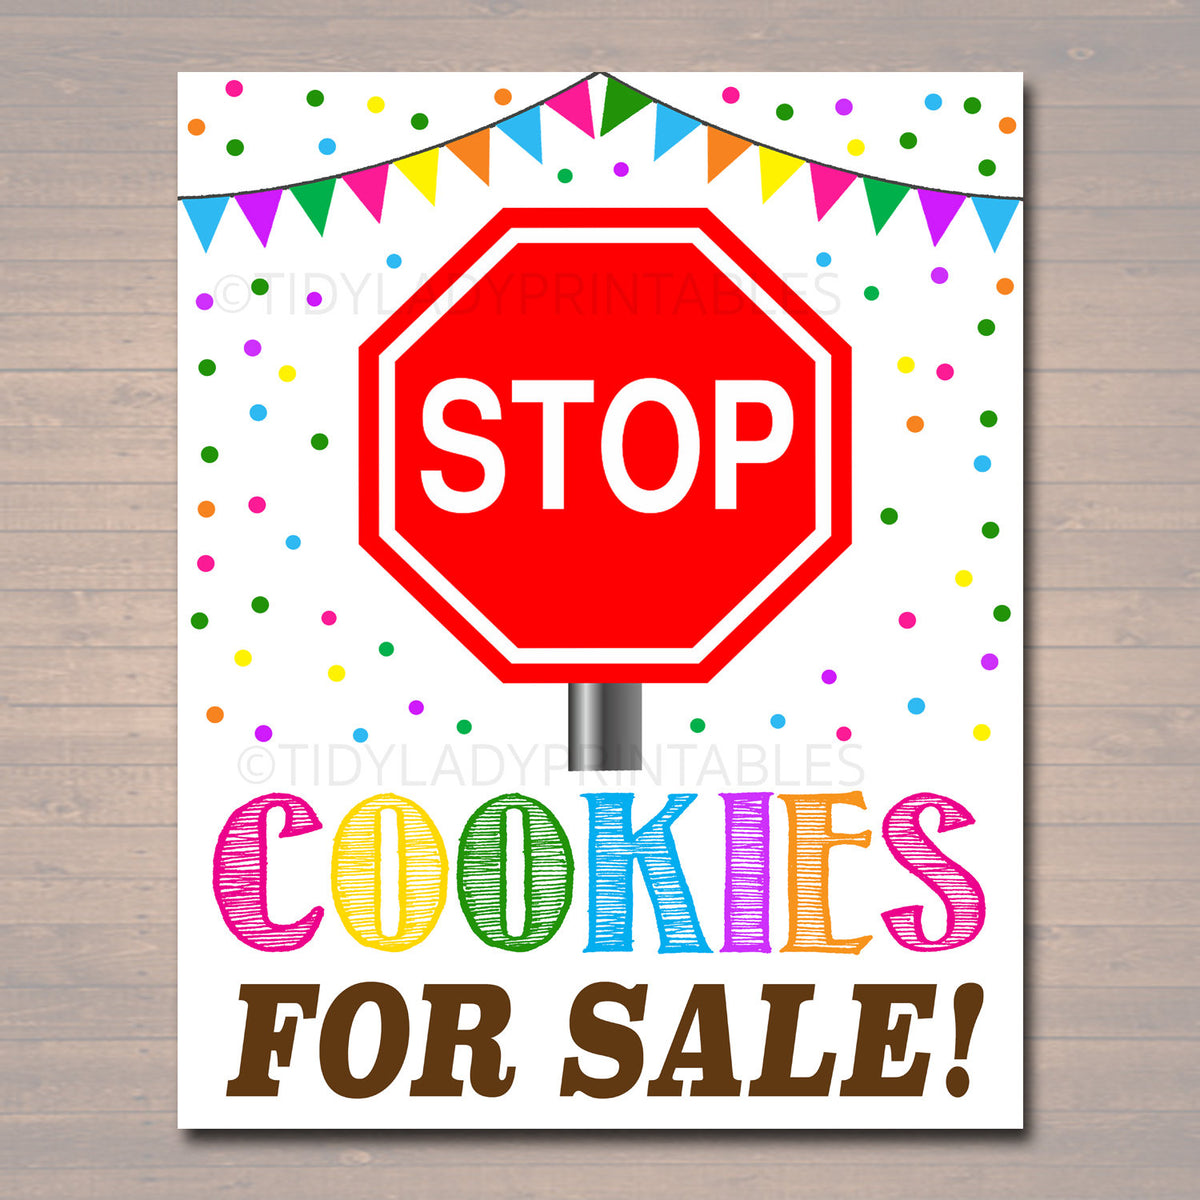 Cookie Booth Ideas, Decor and Signs TidyLady Printables